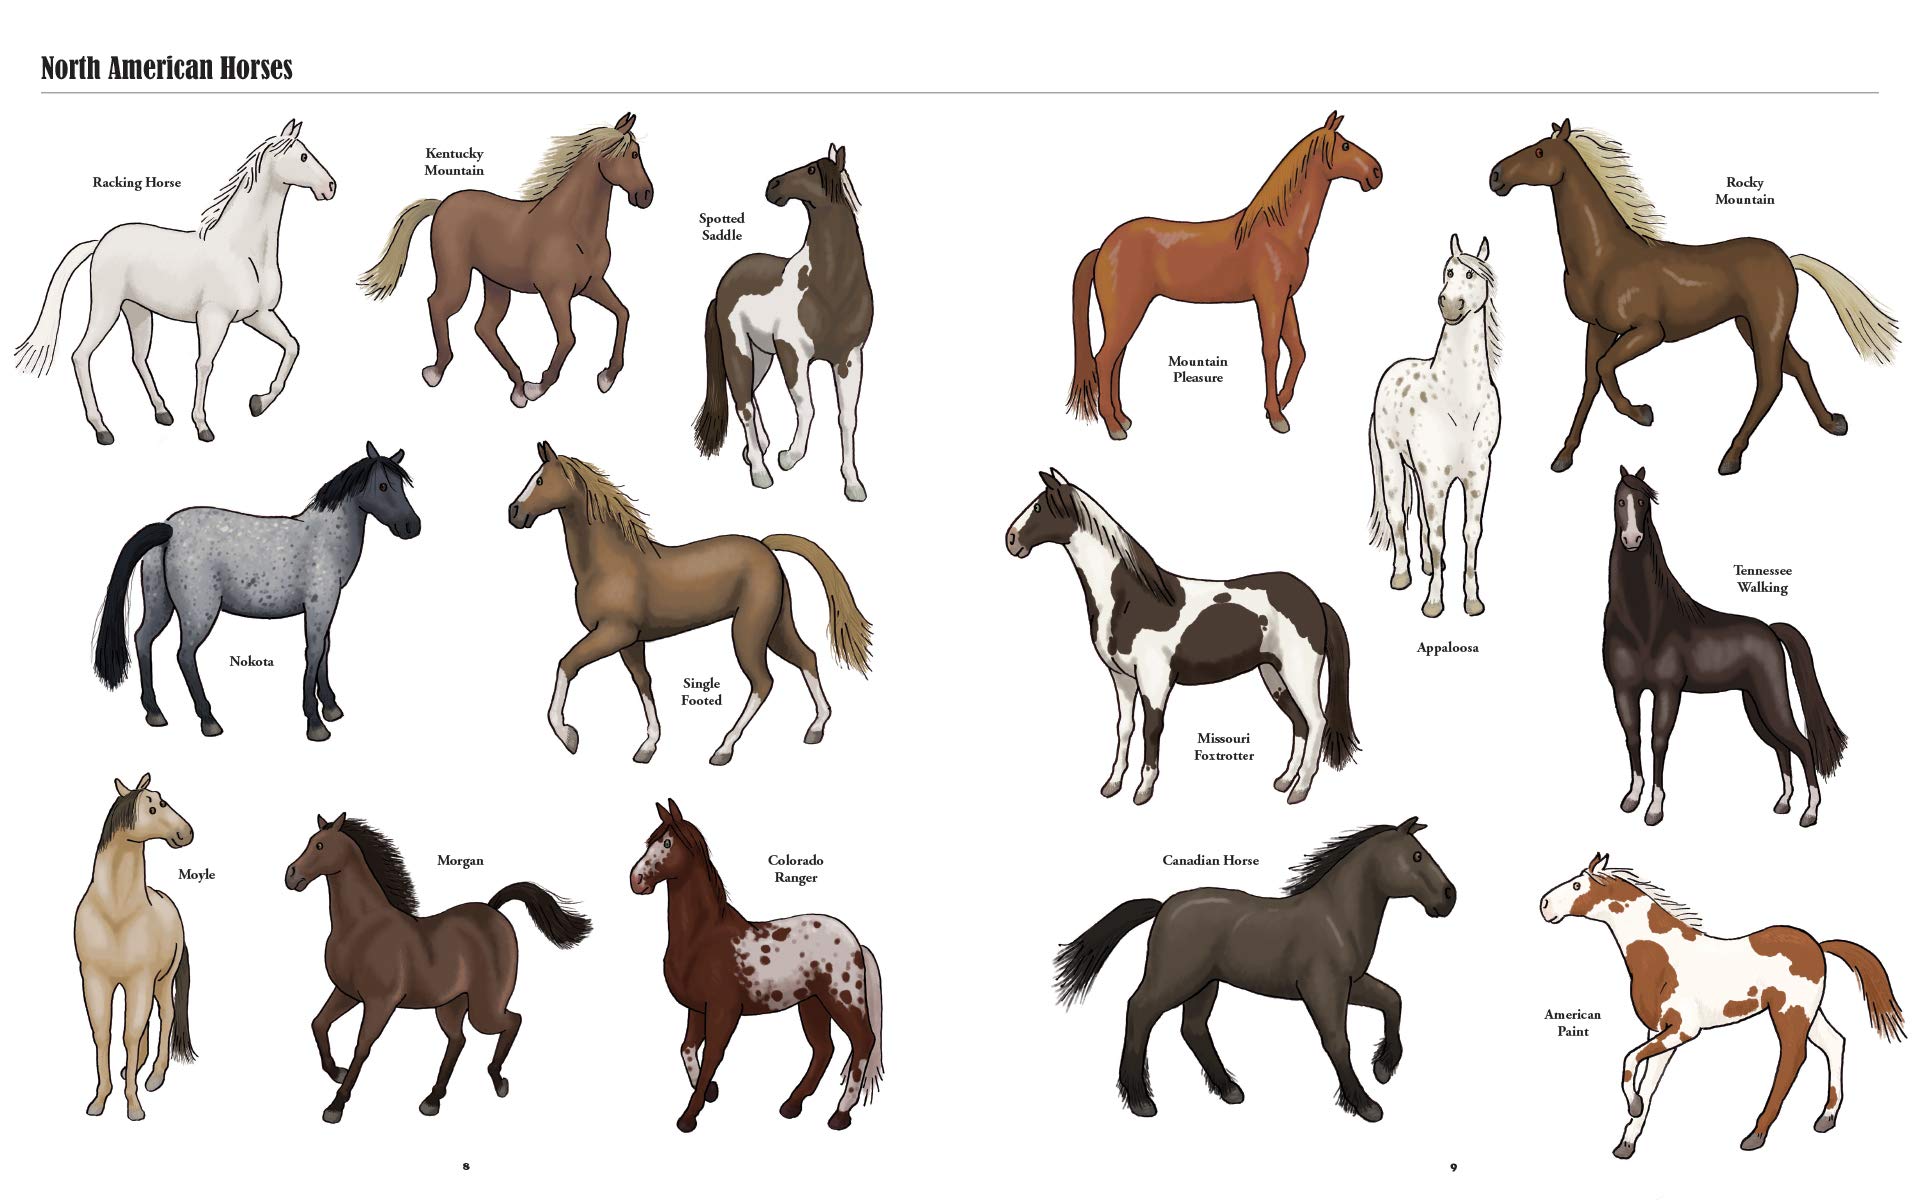 Big Horses, Little Horses: A Visual Guide to the World’s Horses and Ponies